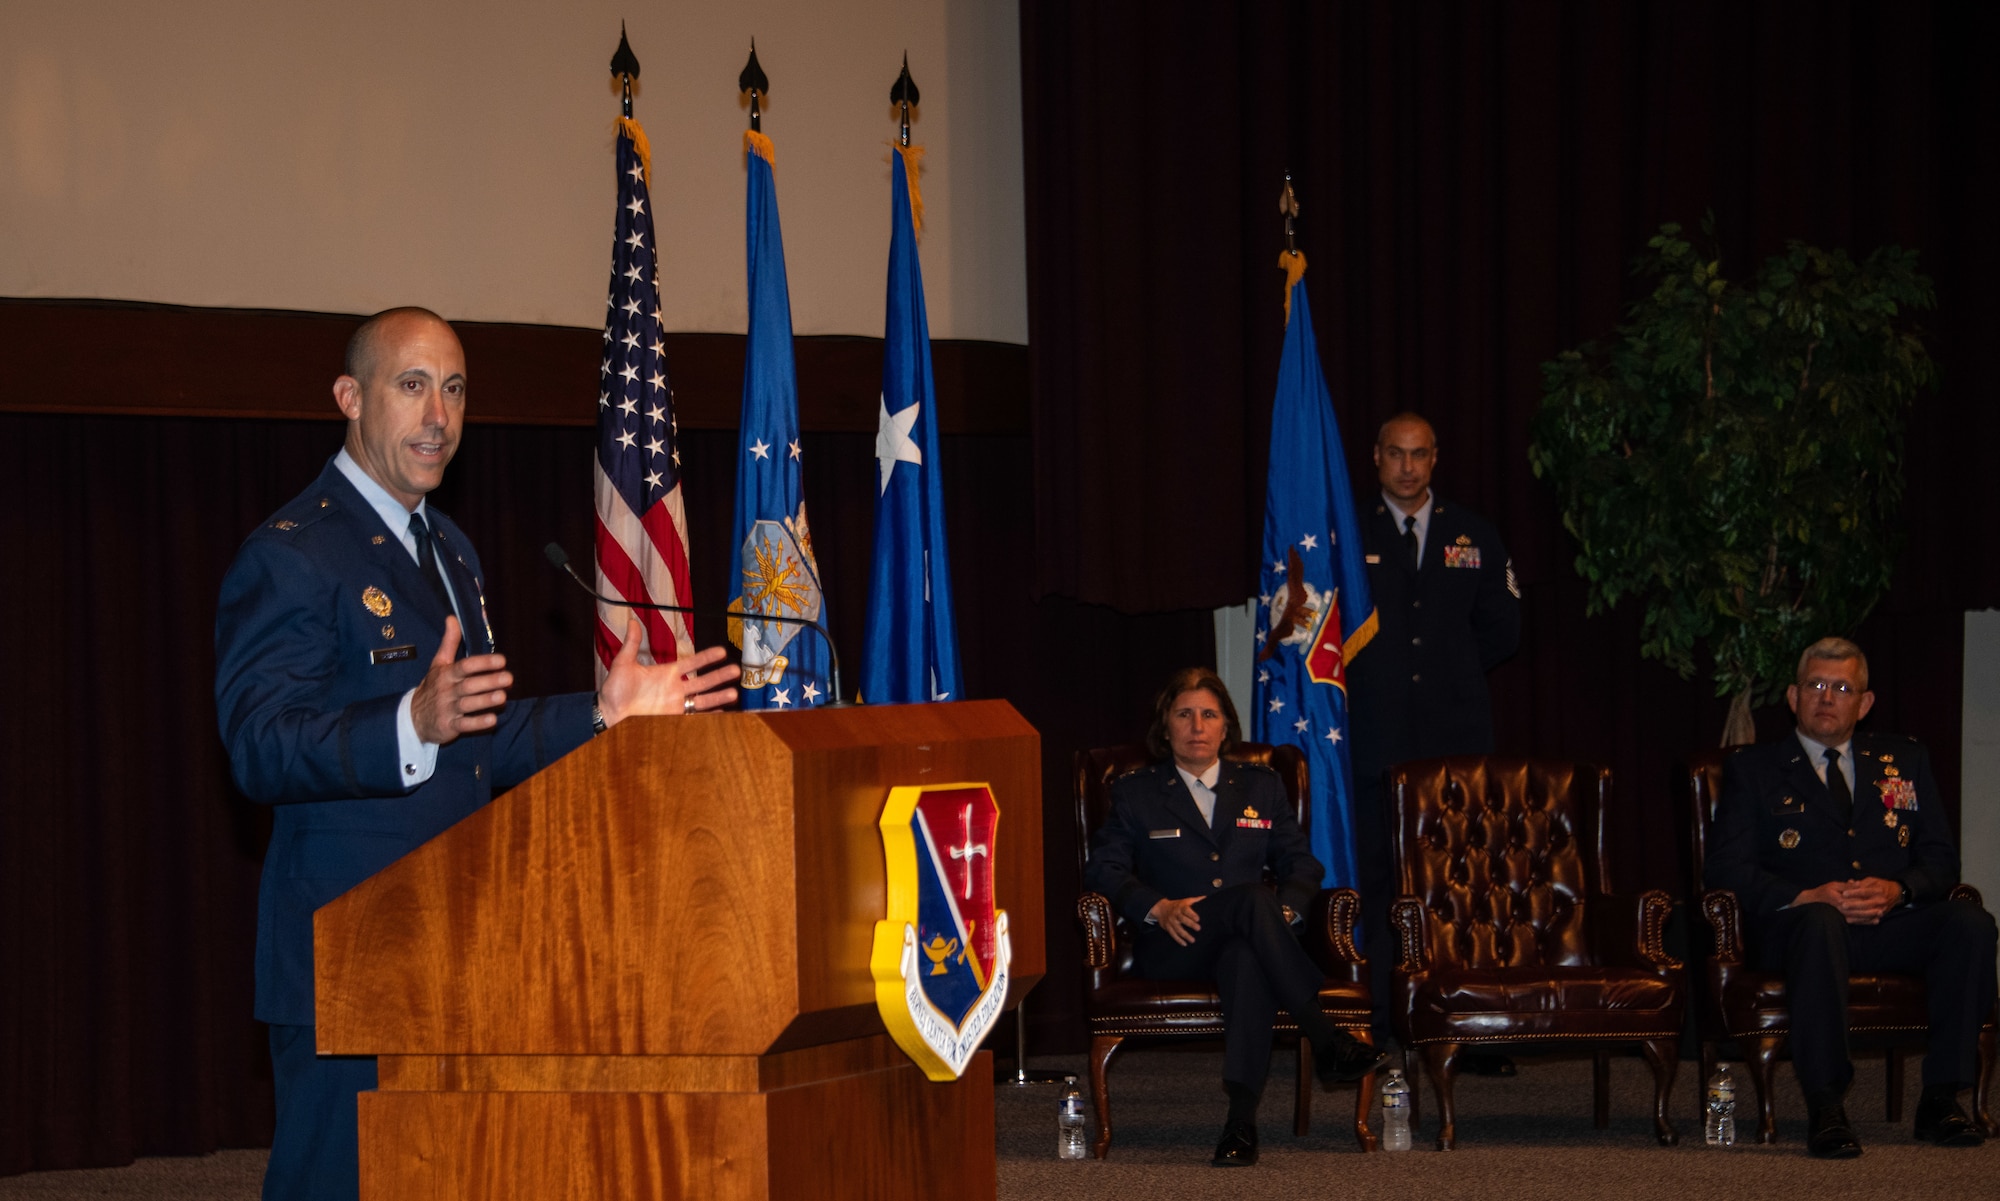 Col. Damian Schlussel, Thomas N. Barnes Center for Enlisted Education commander, address the unit and attendees during a change of command ceremony at the Senior Noncommissioned Officer Academy on Maxwell Air Force Base - Gunter Annex, June 28, 2023. (U.S. Air Force photo/Brian Ferguson)